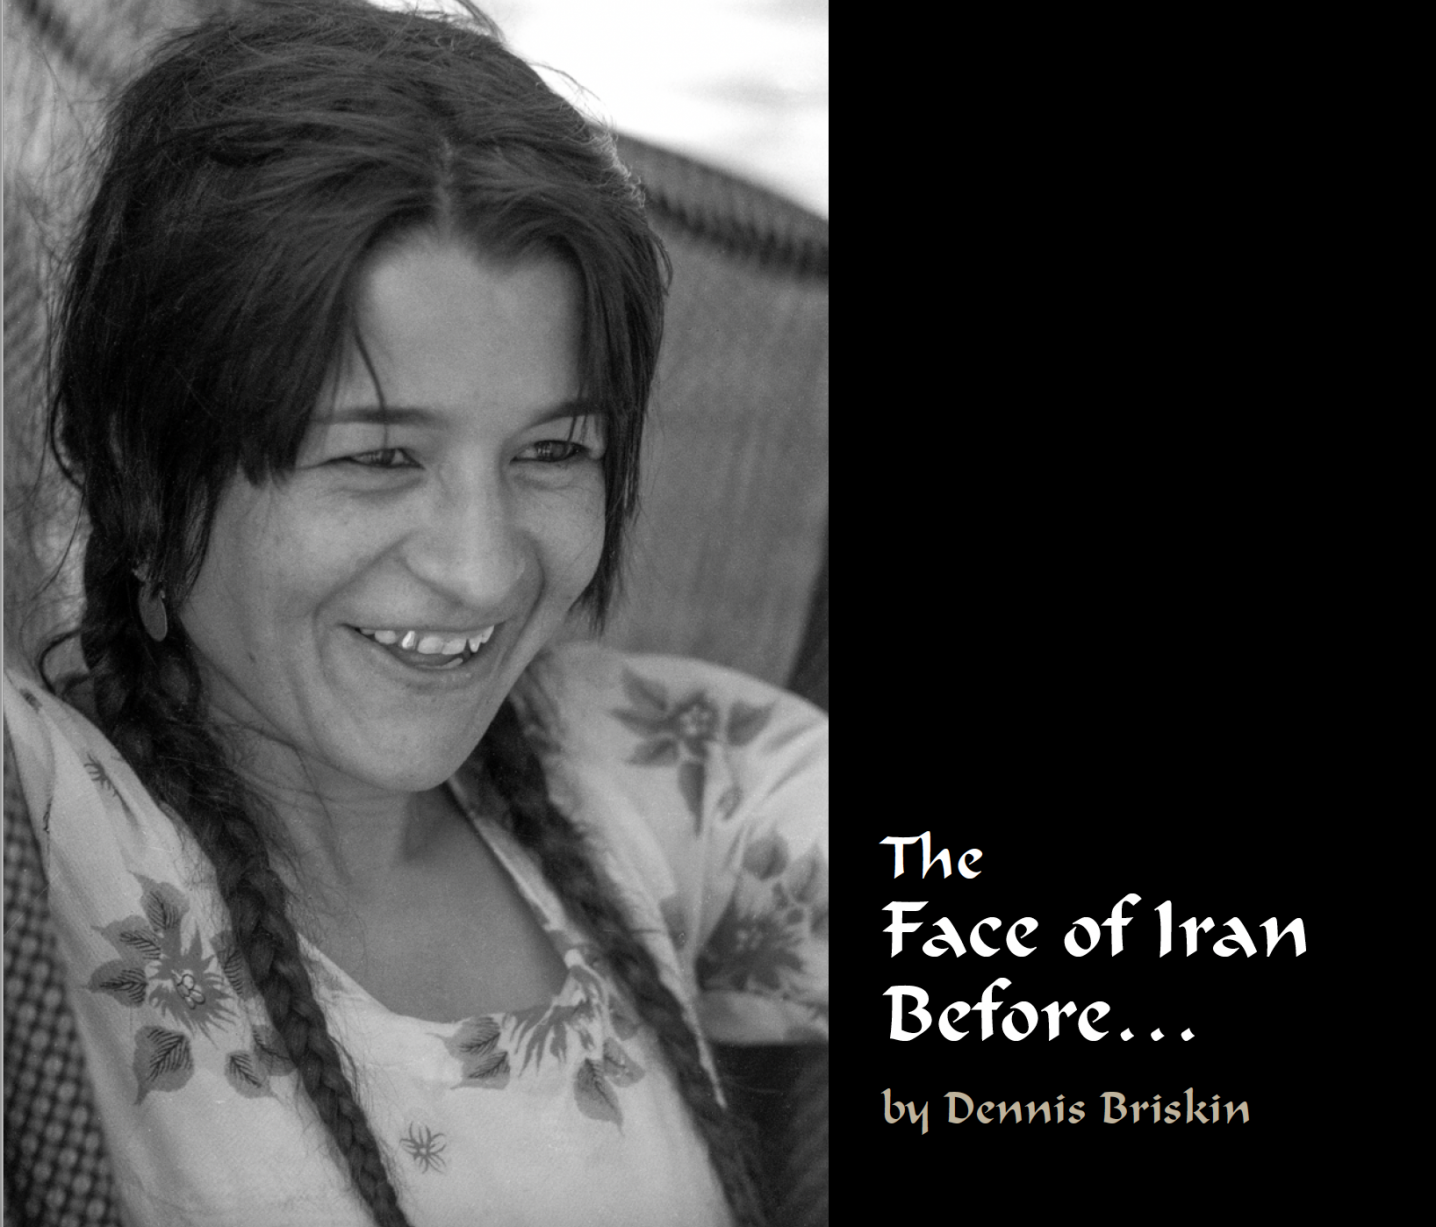 The Face of Iran Before... by Dennis Briskin